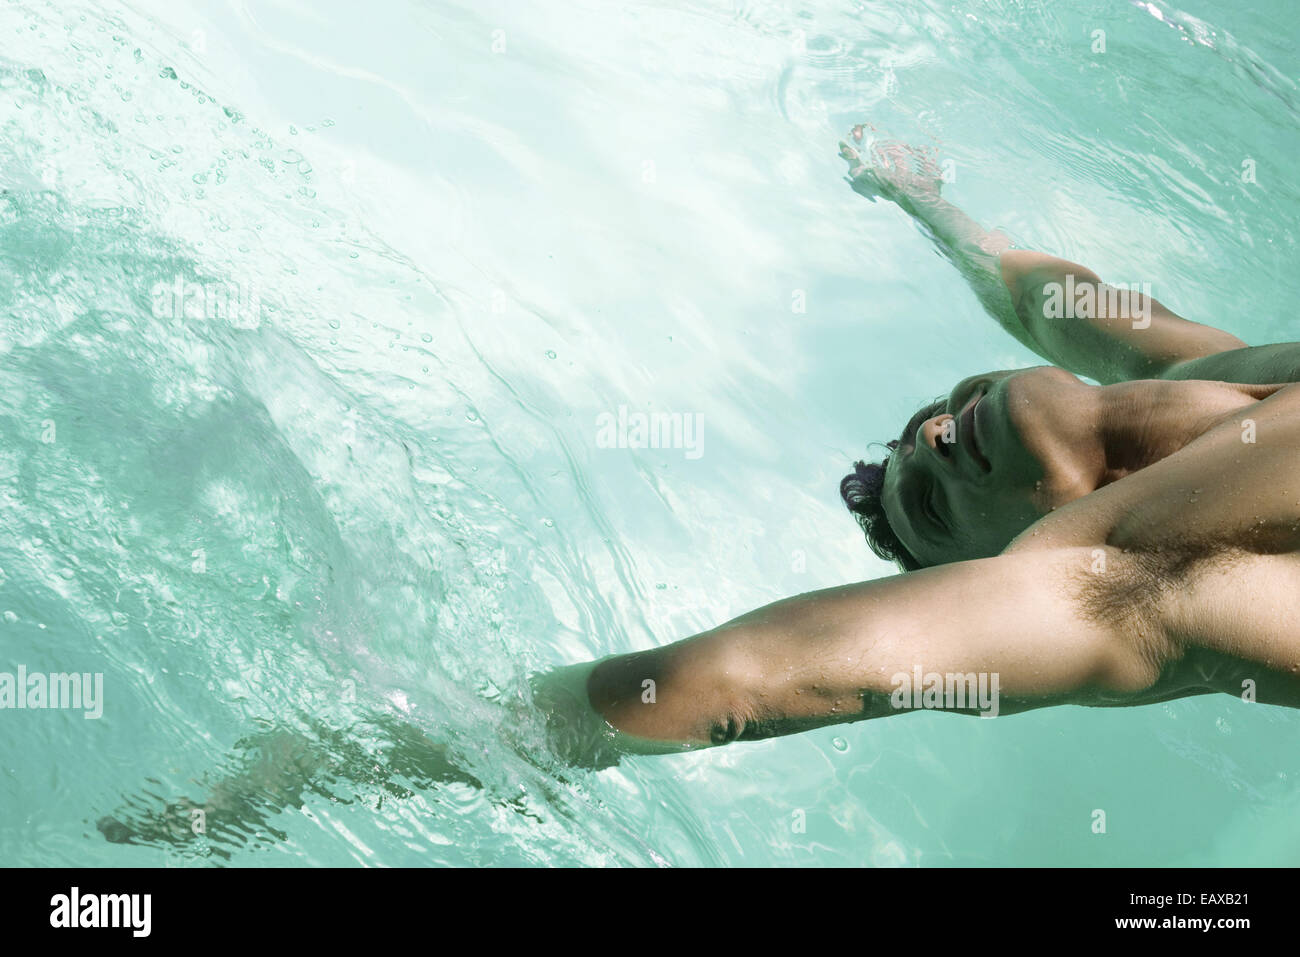 Man leaning backward over swimming pool, arms in water Stock Photo